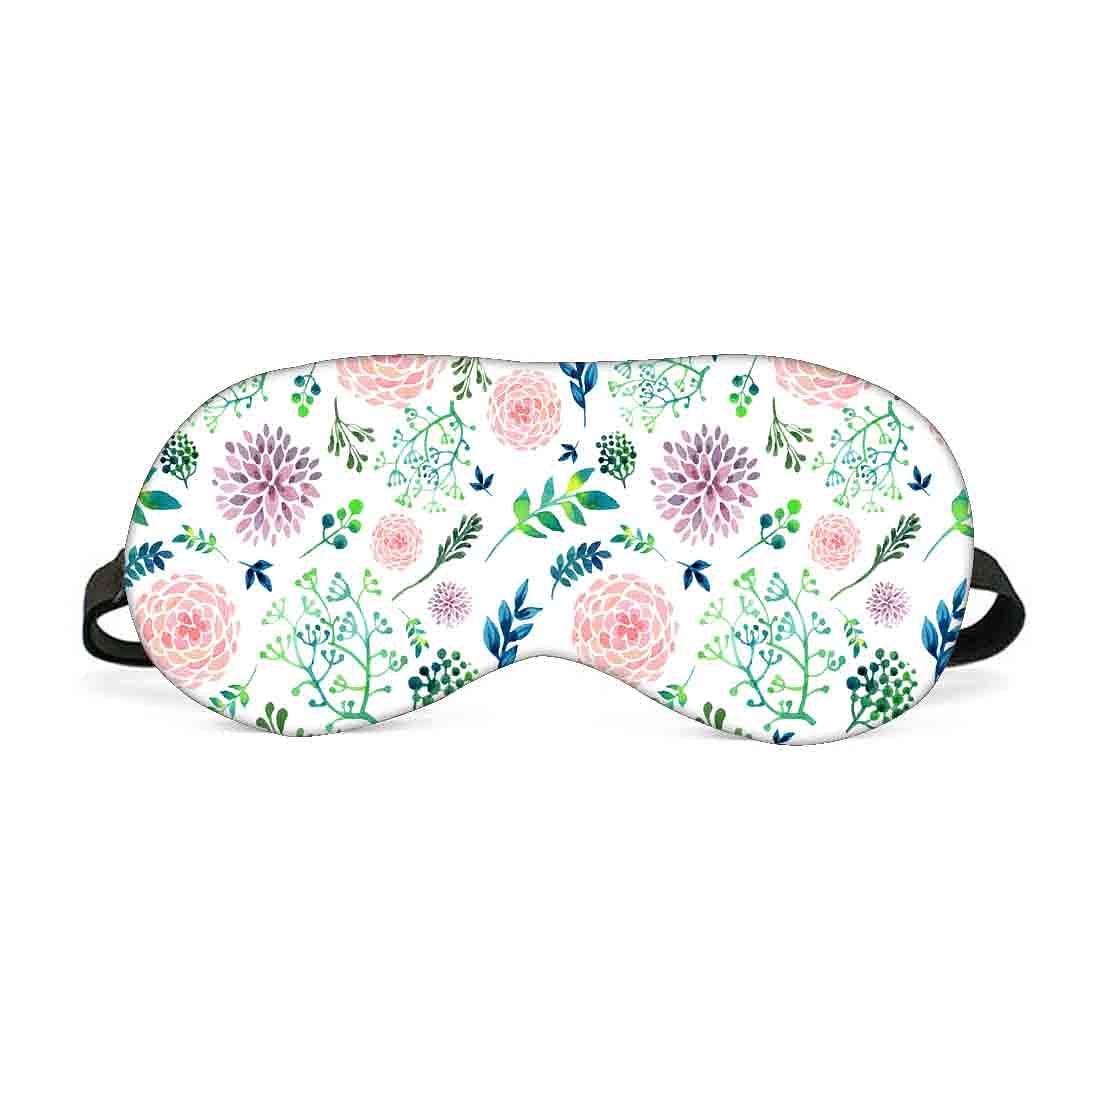 Designer Travel Eye Mask for Sleeping - Flowers and Leaves - Made in India Nutcase